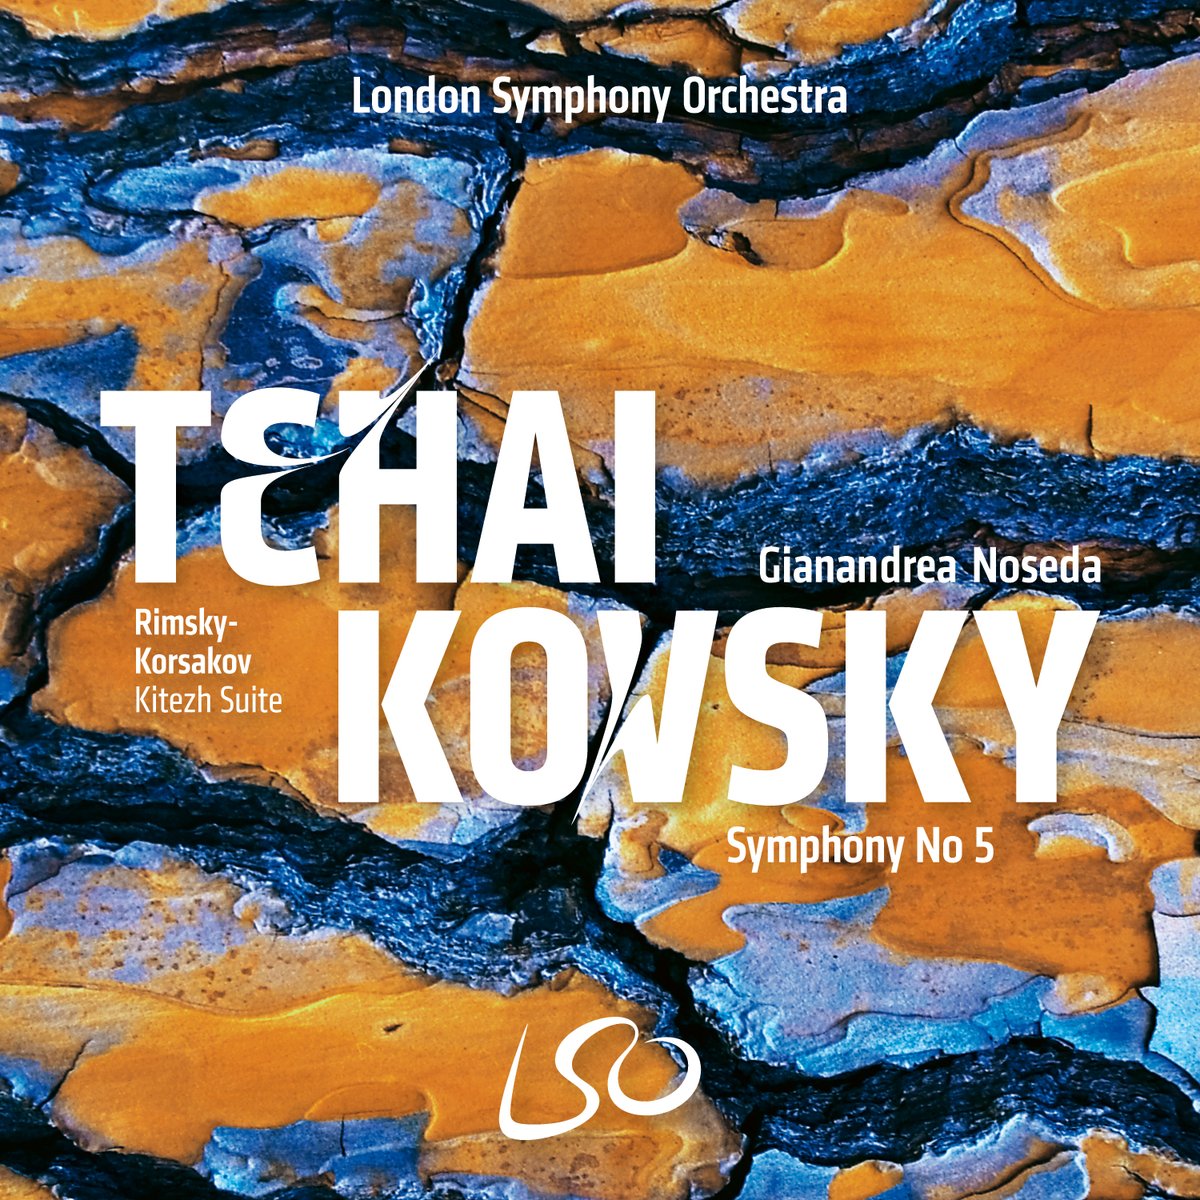 Our newest album is out today! History, heritage, and fate combine in this recording from @NosedaG and the London Symphony Orchestra, bringing together the music of Tchaikovsky and Rimsky-Korsakov. Listen or purchase here: lnk.to/tchaikovsky5